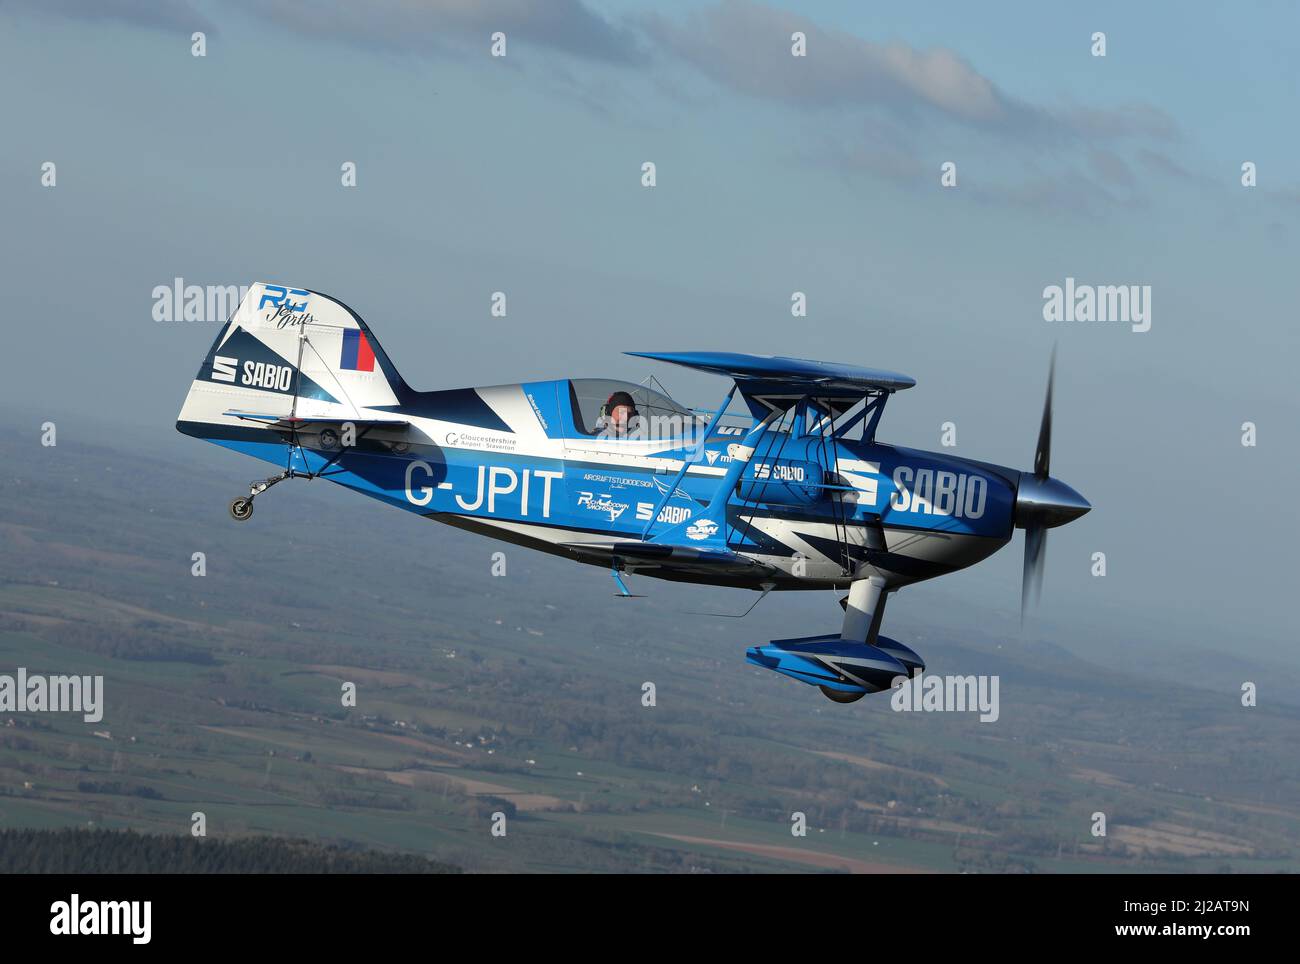 Air to Air image of Rich Goodwin in his Jet Pitts which has 2 jet engines as well as a piston engine. Stock Photo